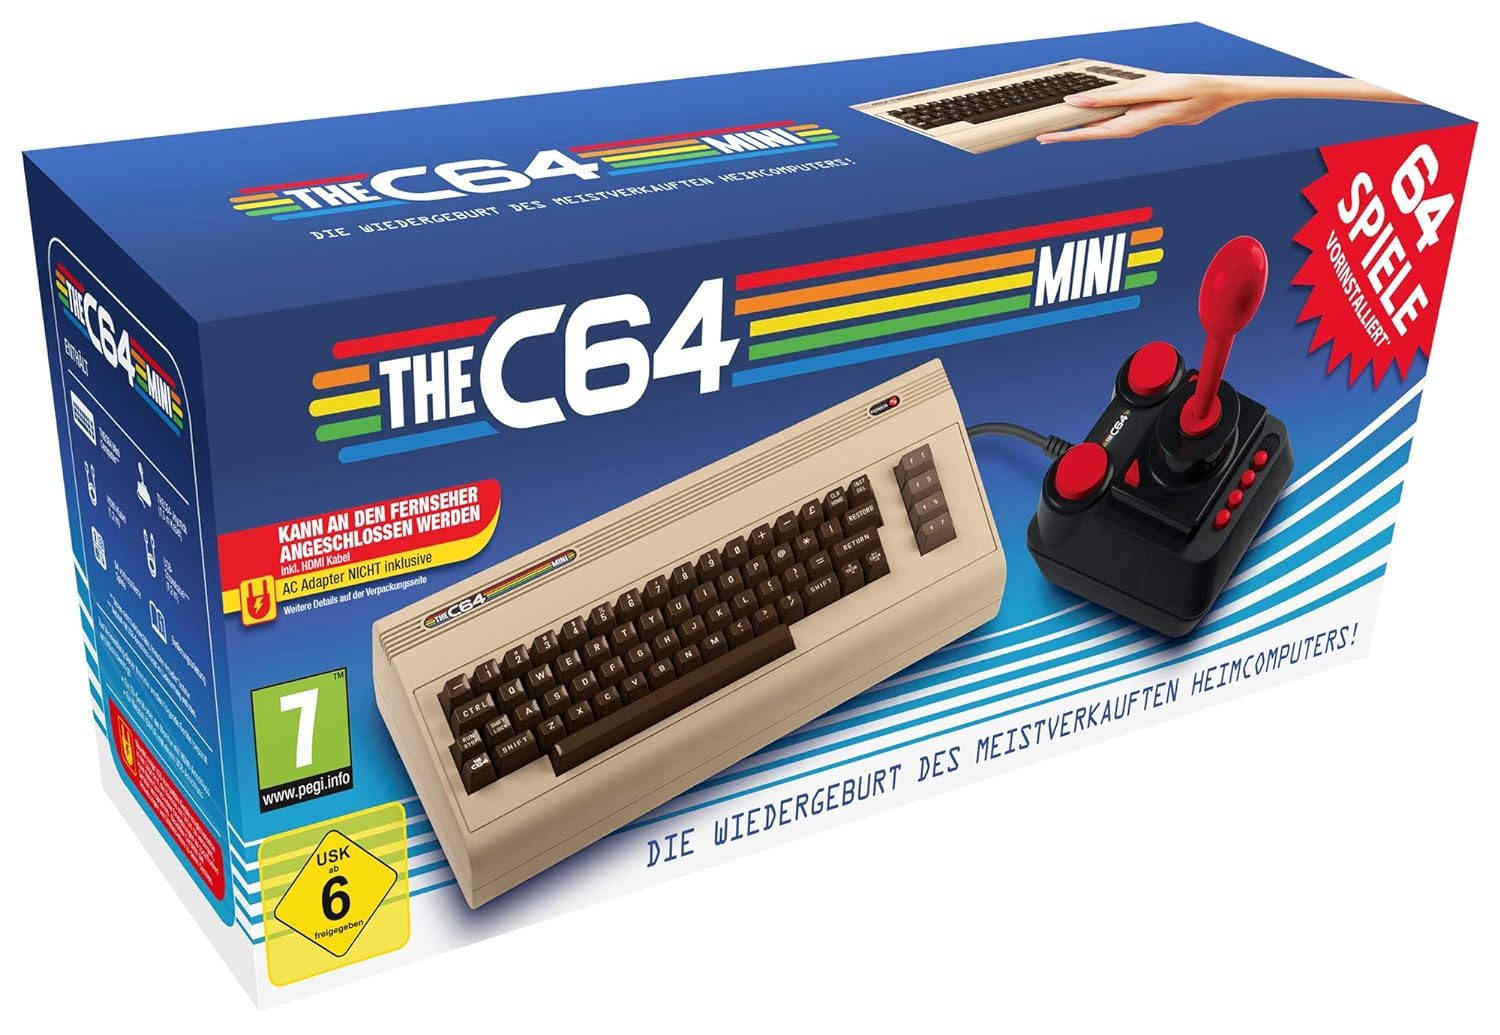 Commodore Spielkonsole Konsole Gaming, Spielekonsole Commodore C64 Mini (inkl. 1 Controller), Gaming Konsolen Spielkonsolen Videospiel Konsole PC, Videospielkonsole